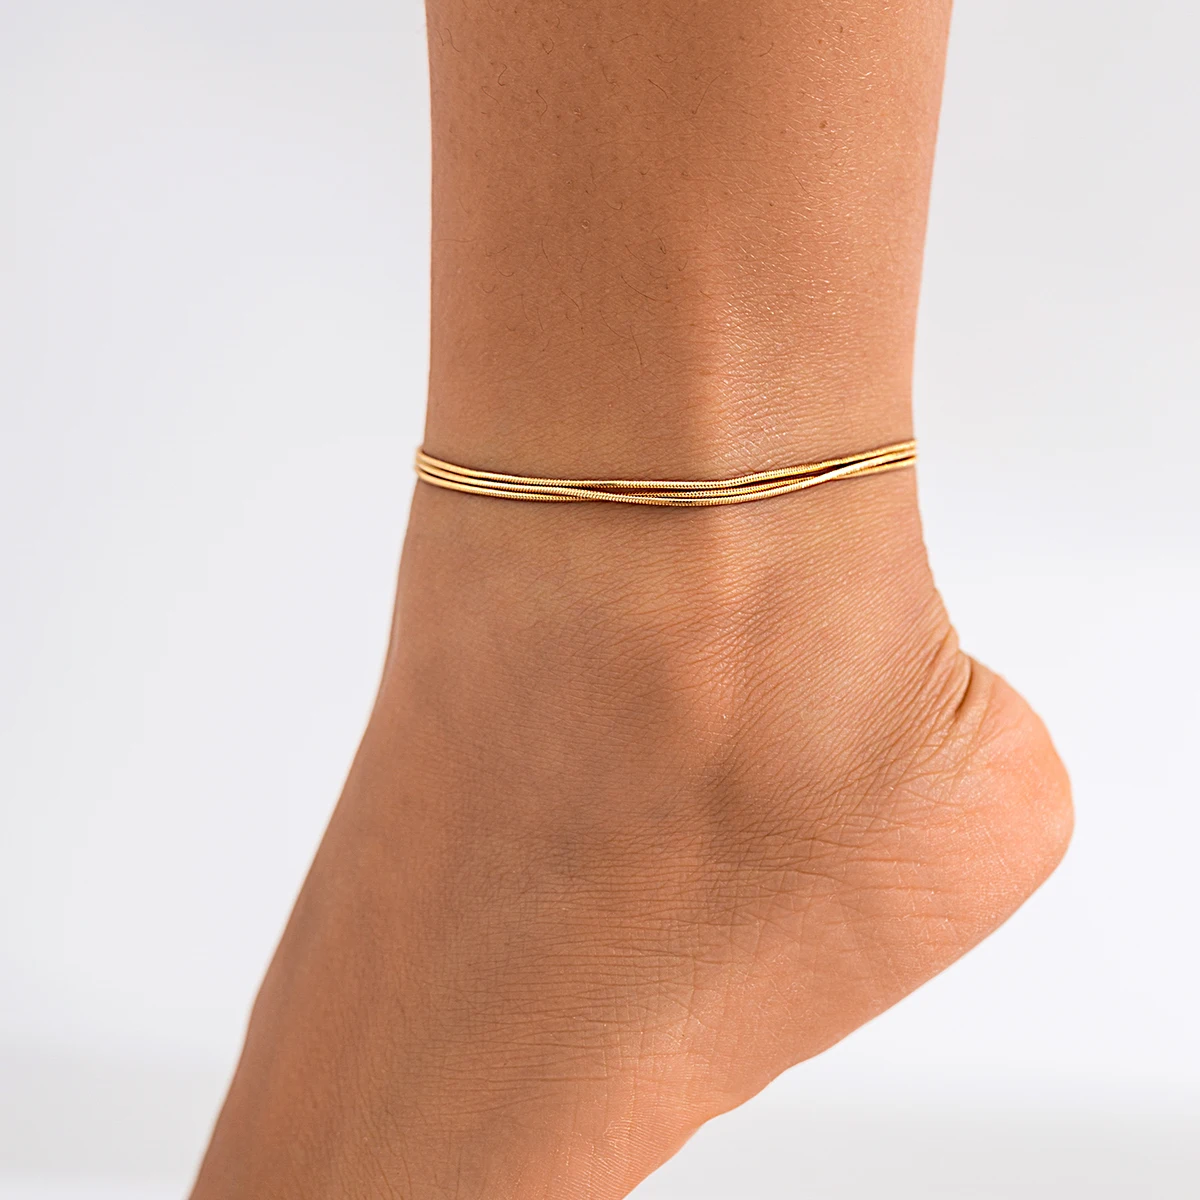 

Simple Snake Bone Chain Anklet Bracelet for Women Summer Beach Gold Color Ankle Barefoot Sandal Foot Jewelry Y2K Accessories New